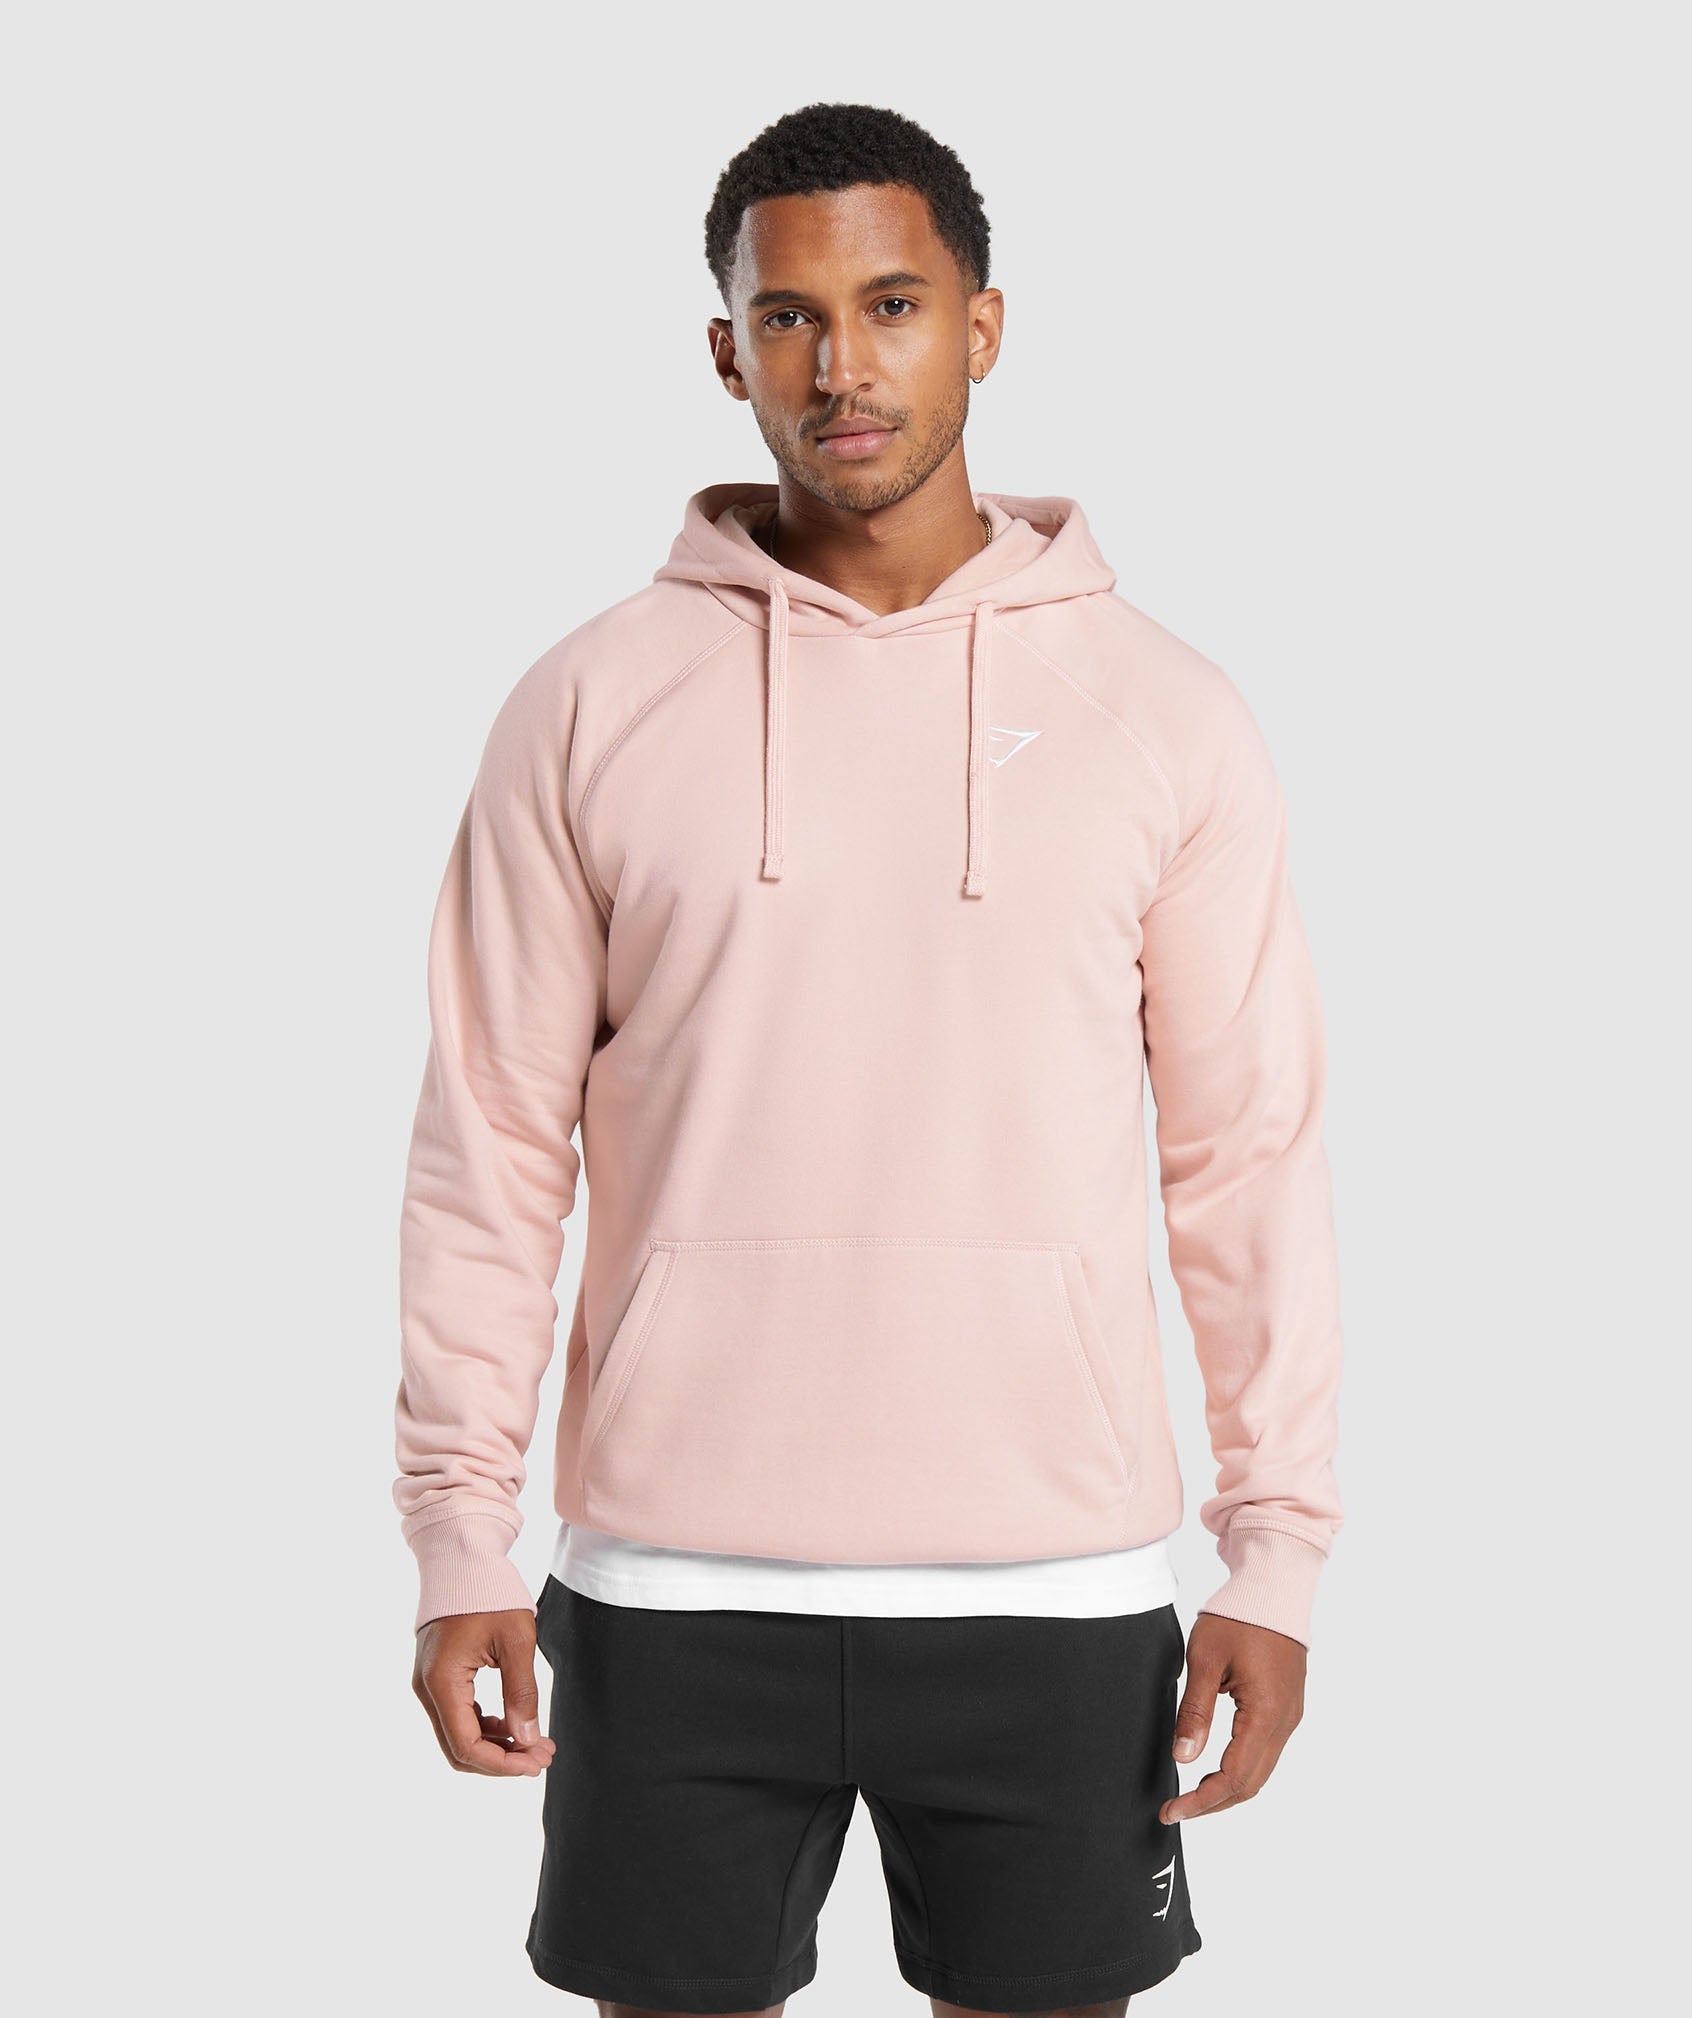 Crest Hoodie in Misty Pink - view 1